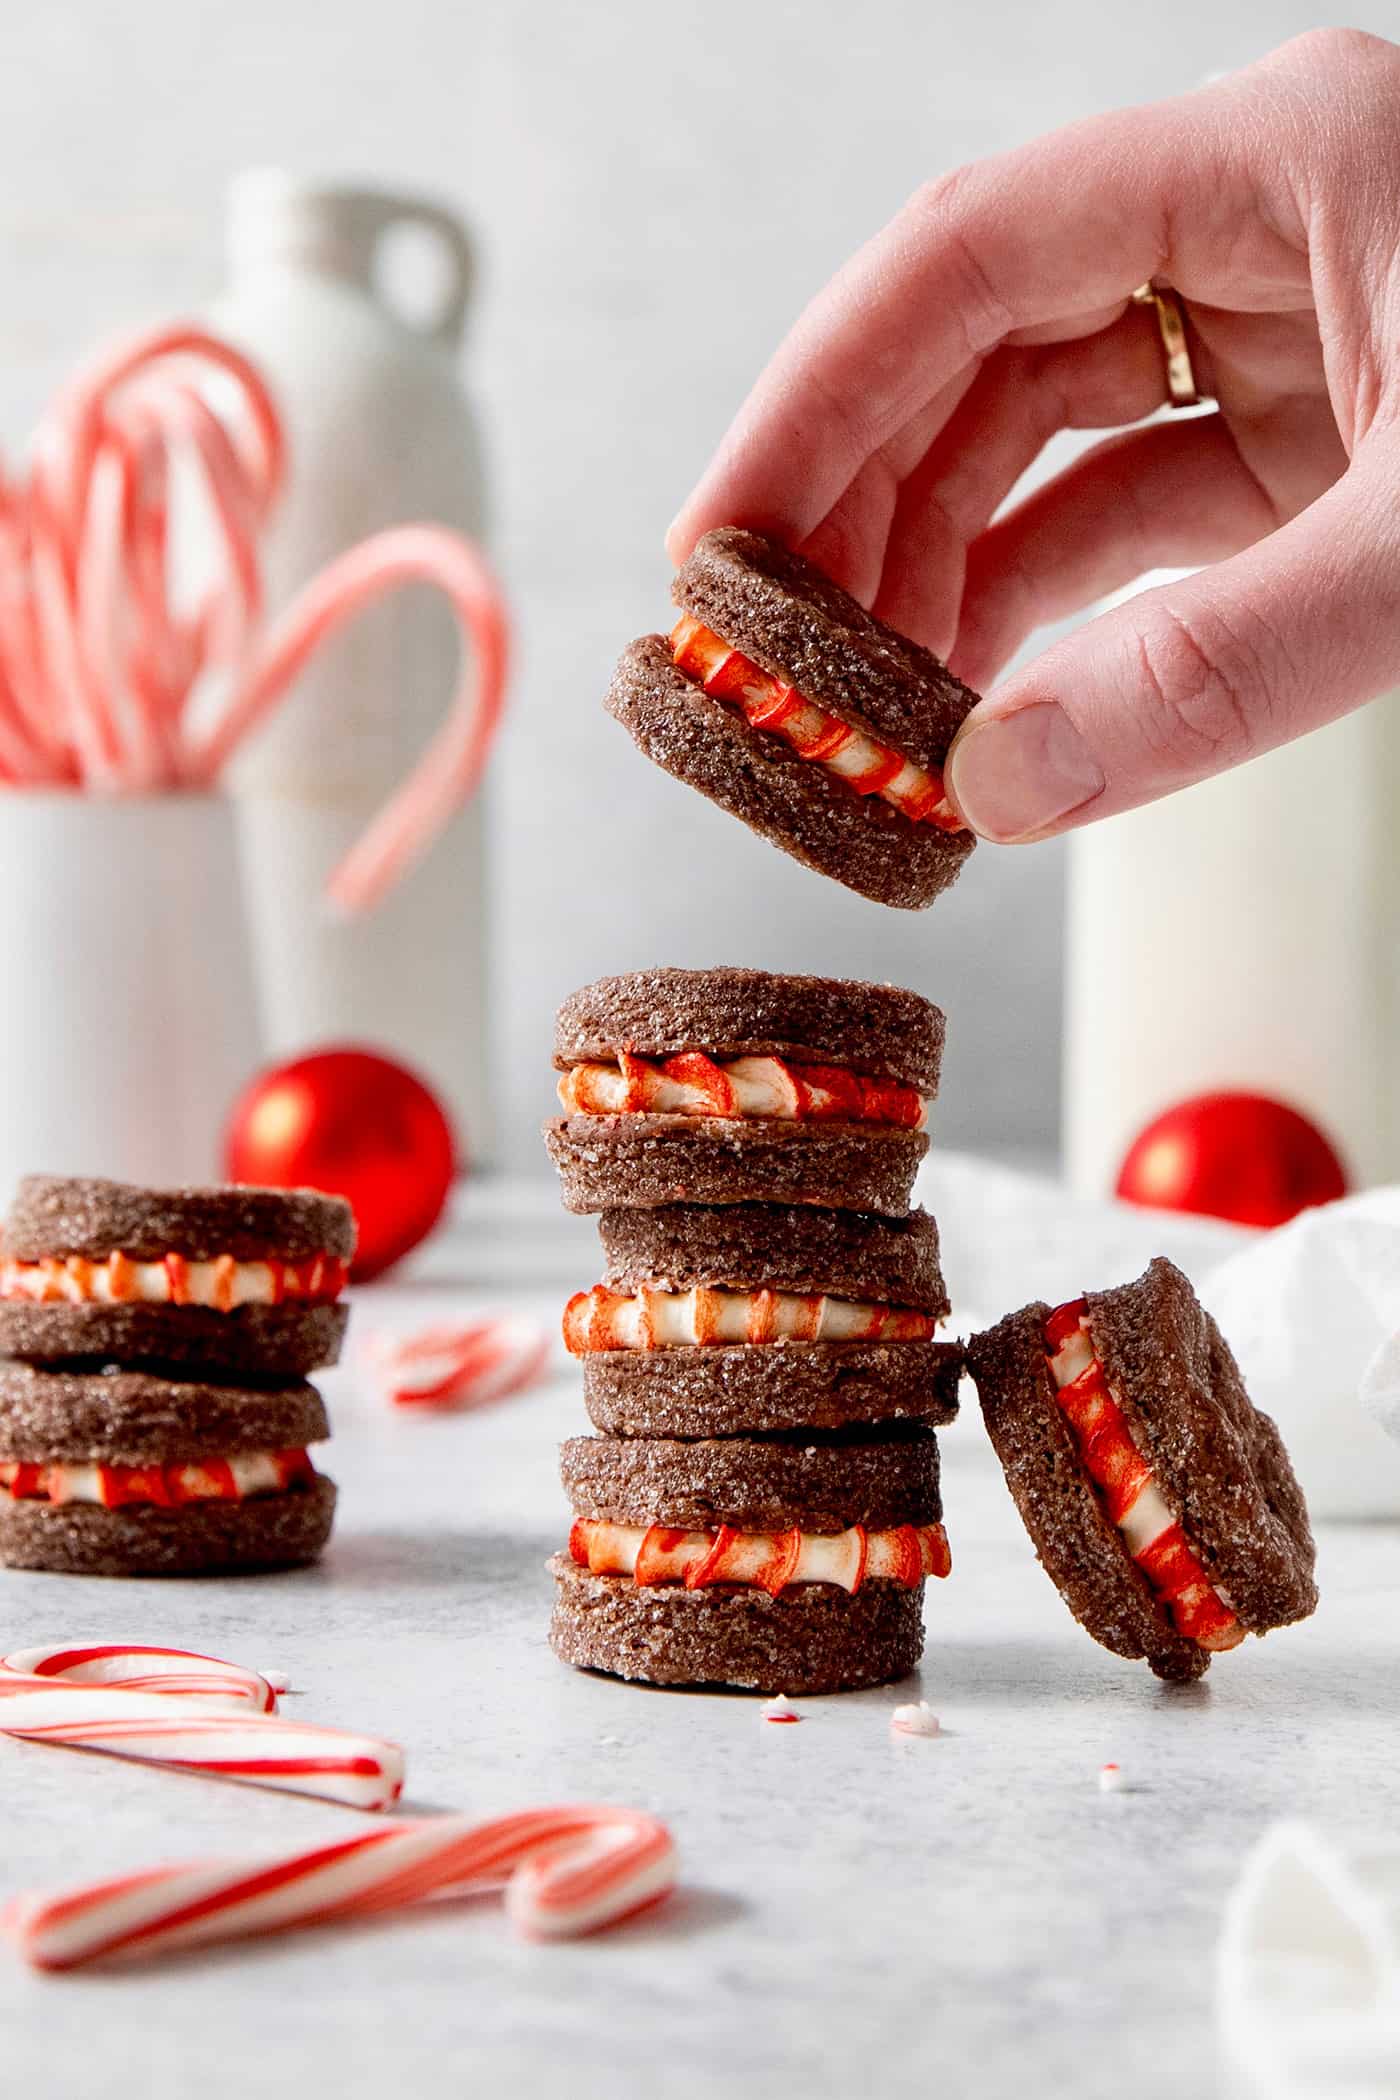 A hand picks up a chocolate cream wafer cookie from a stack of cookies, with candy canes seen in the background.